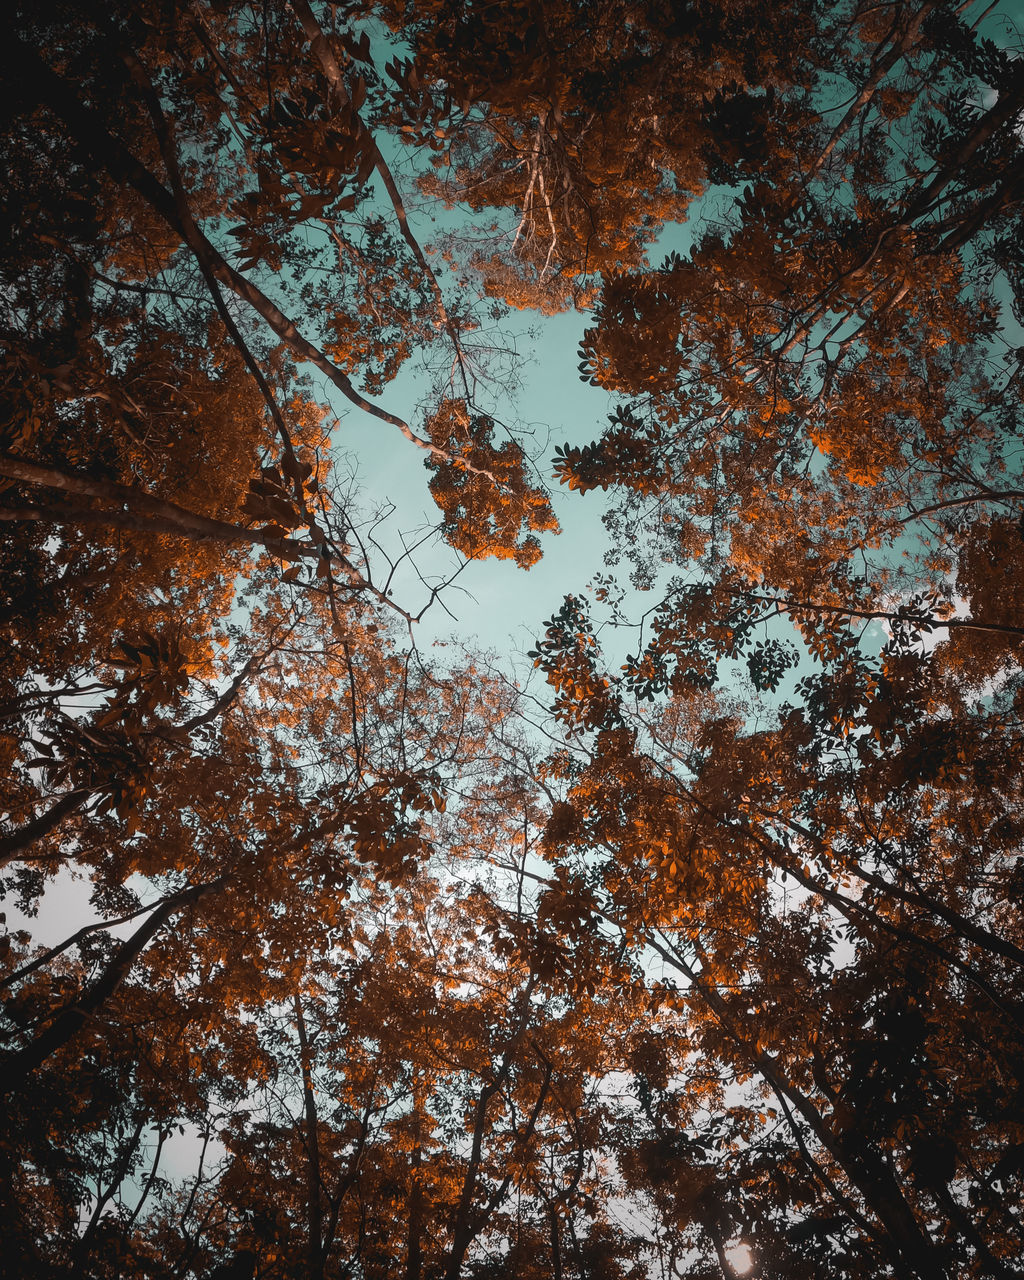 LOW ANGLE VIEW OF TREES IN FOREST